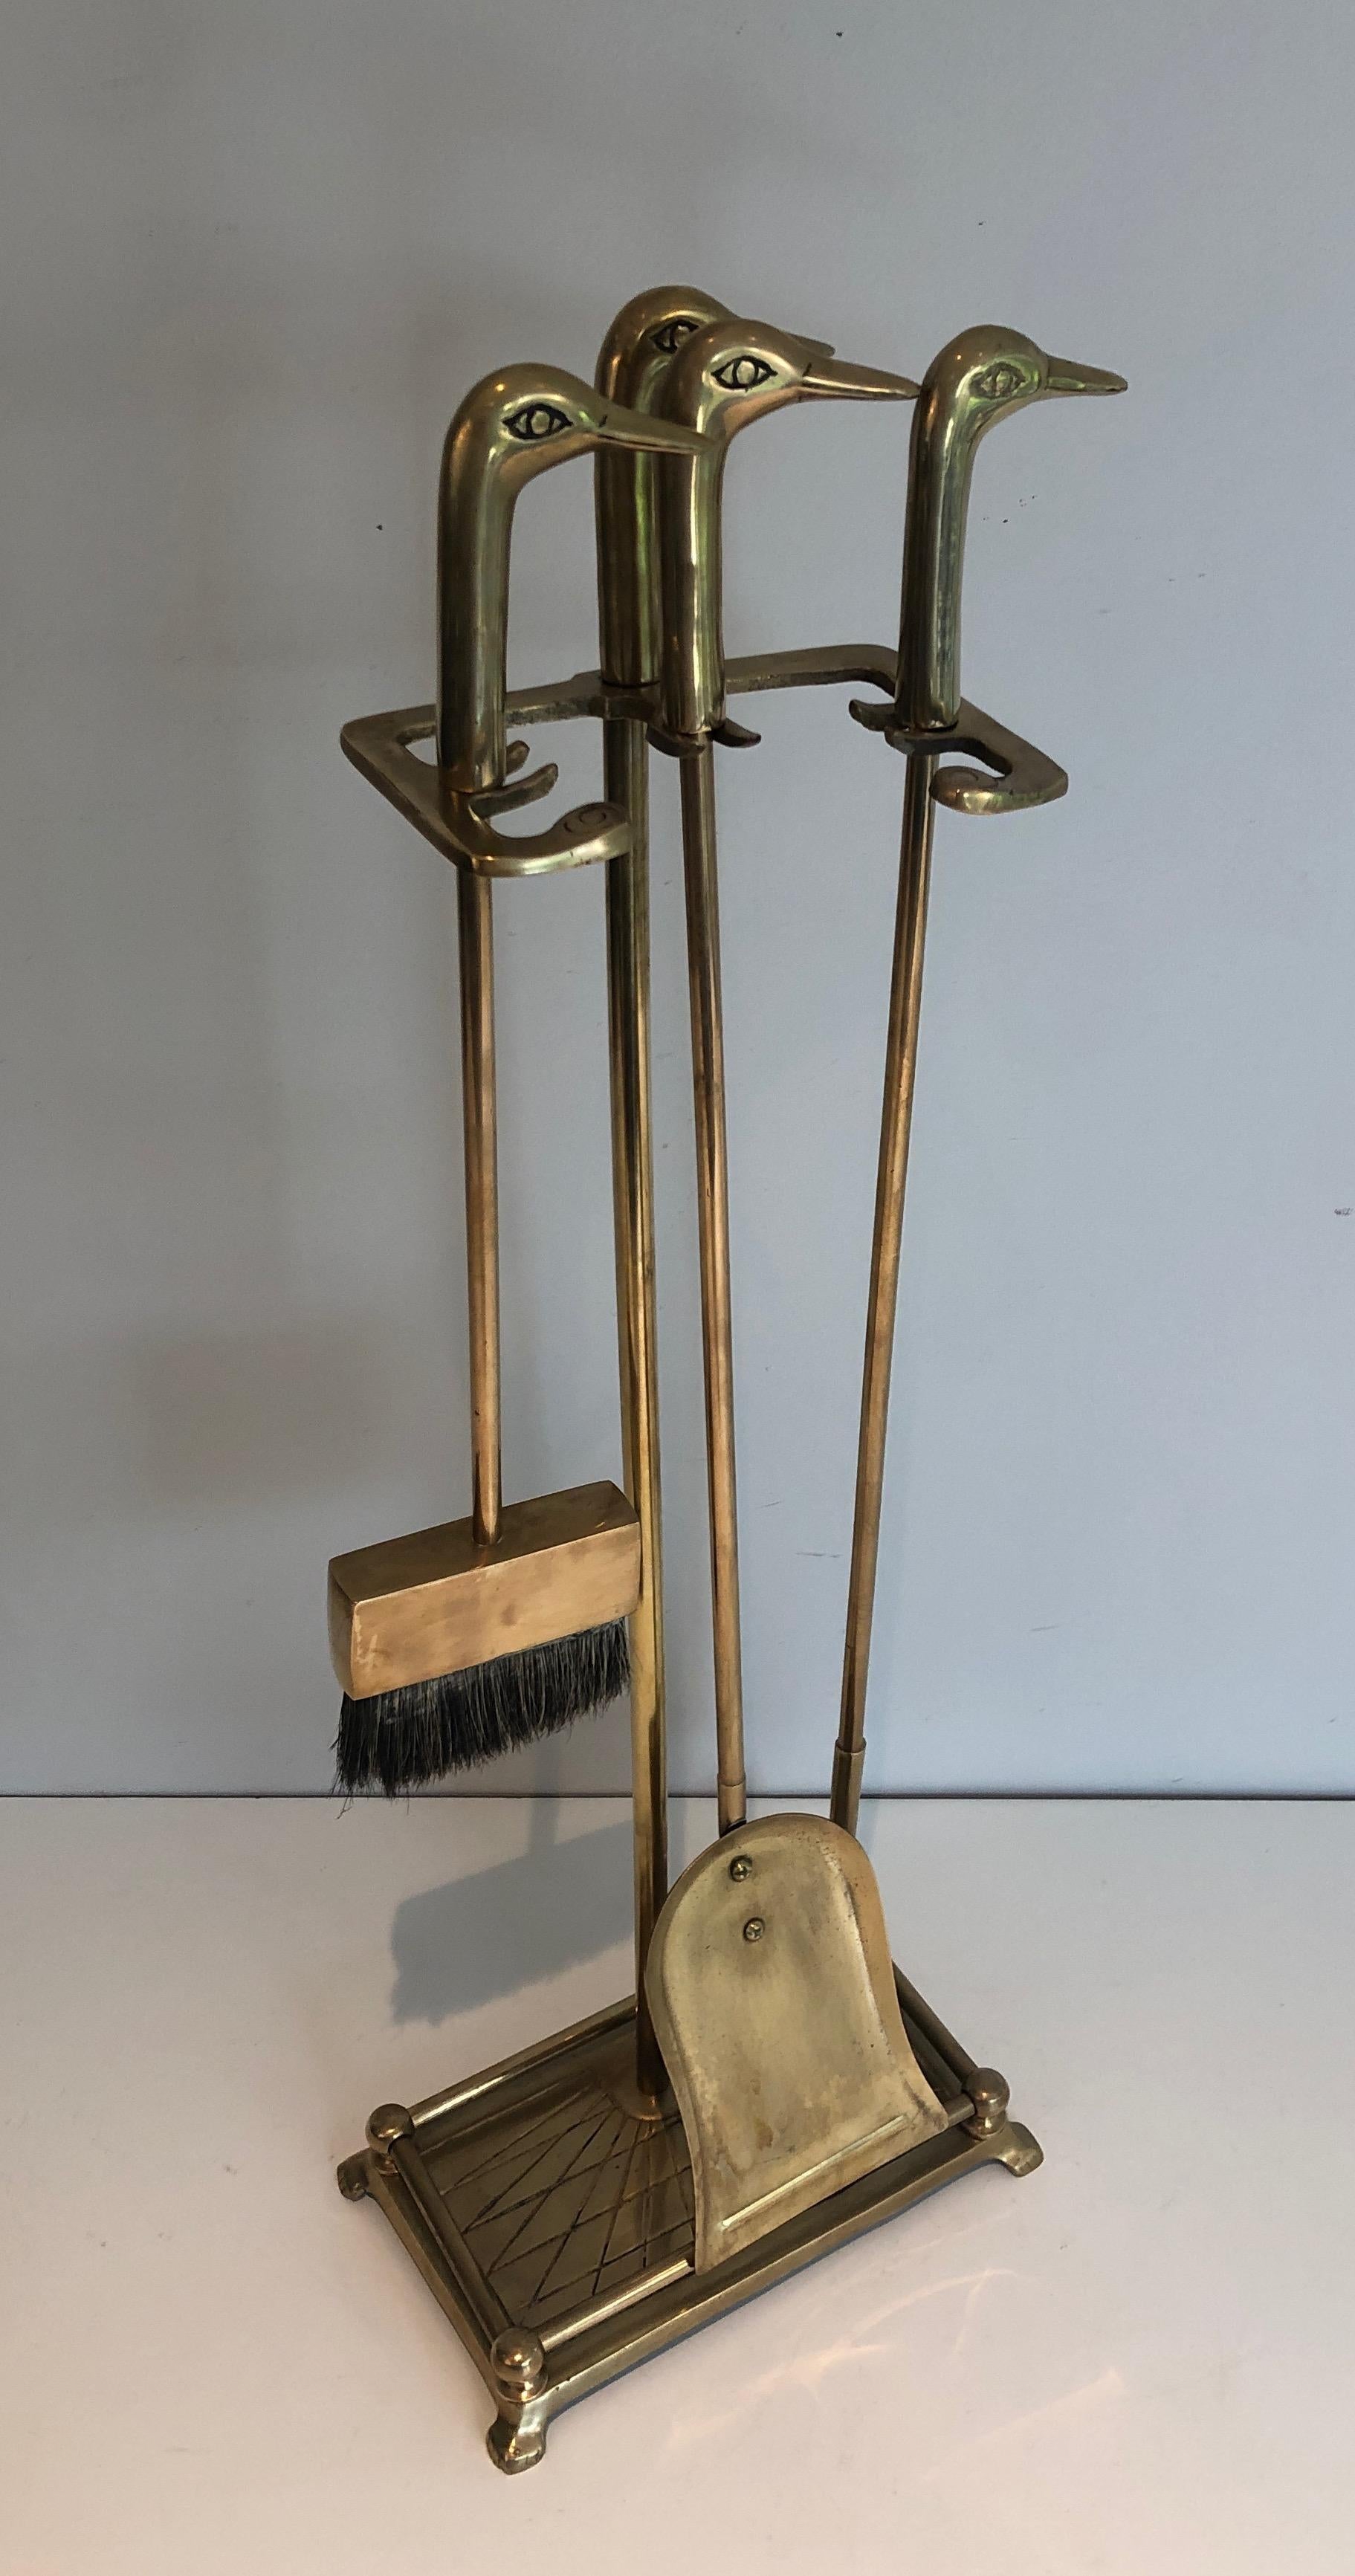 Duck Fireplace Tools - 10 For Sale on 1stDibs